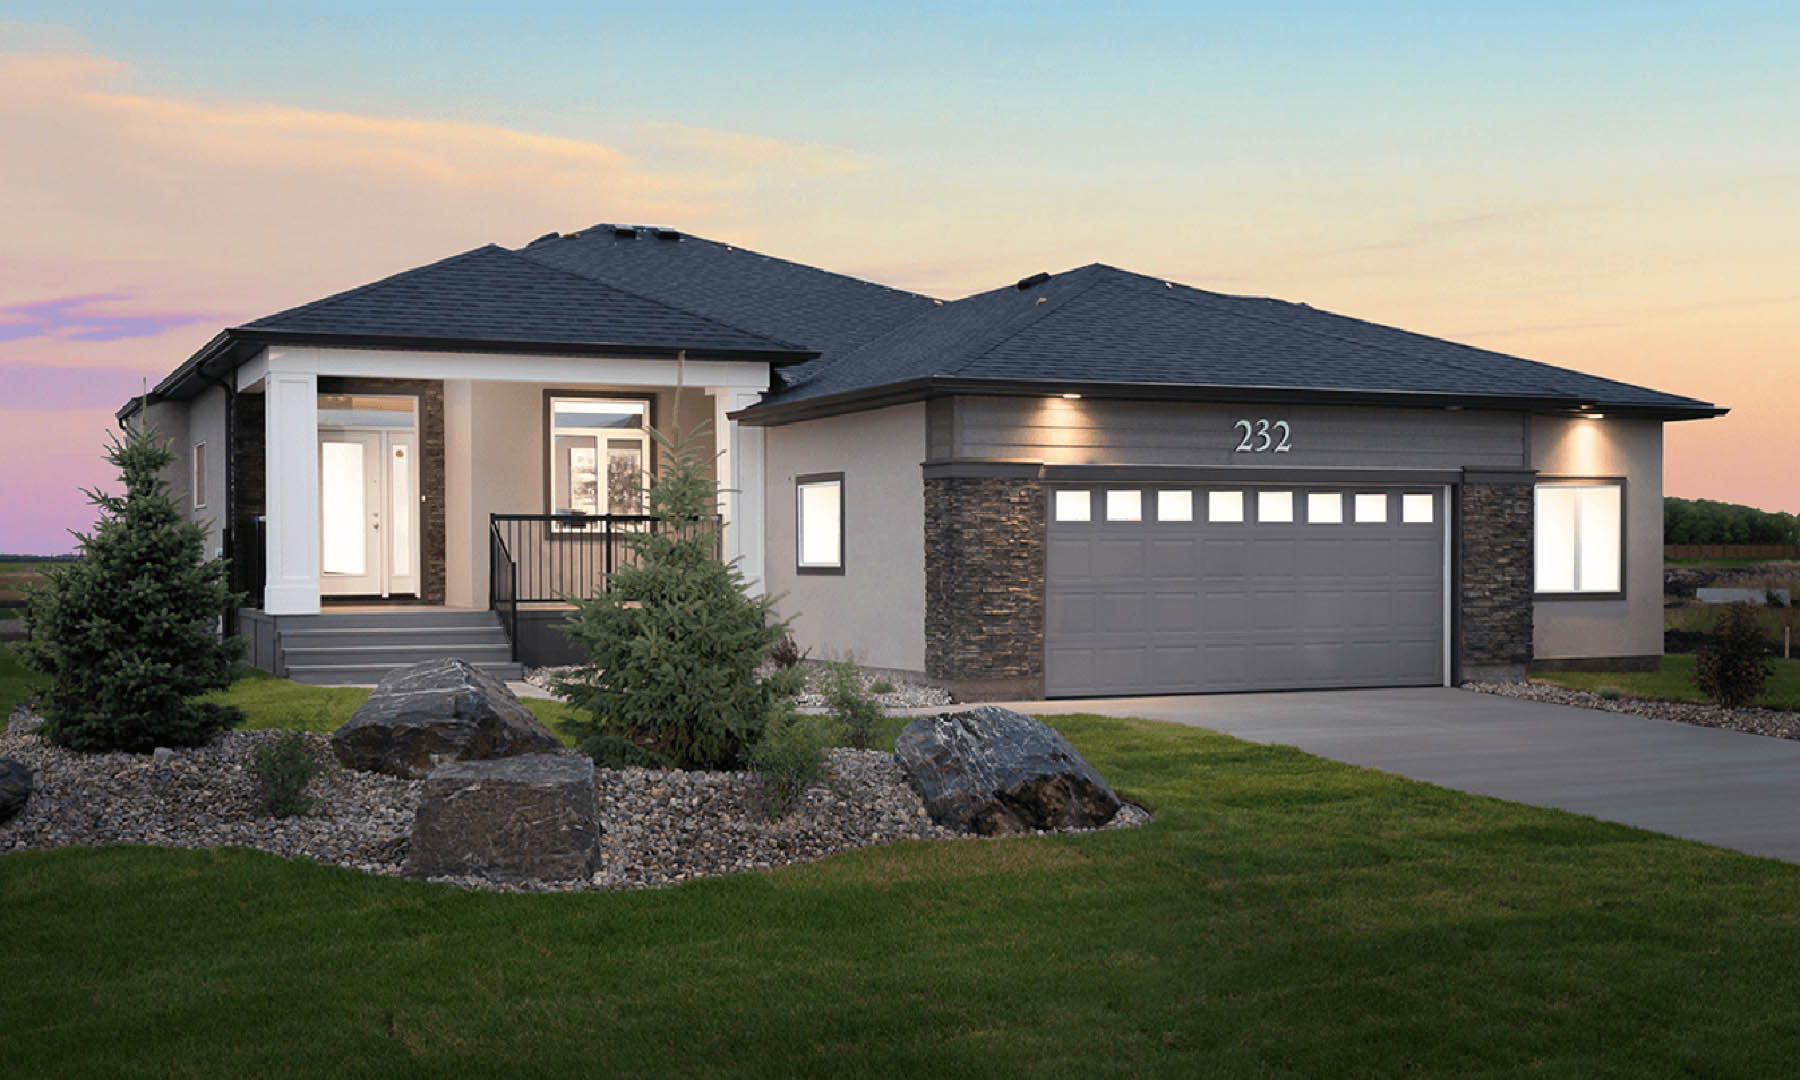 New Community: Grand Opening Event in Grande Pointe Meadows! Show Home Exterior Image